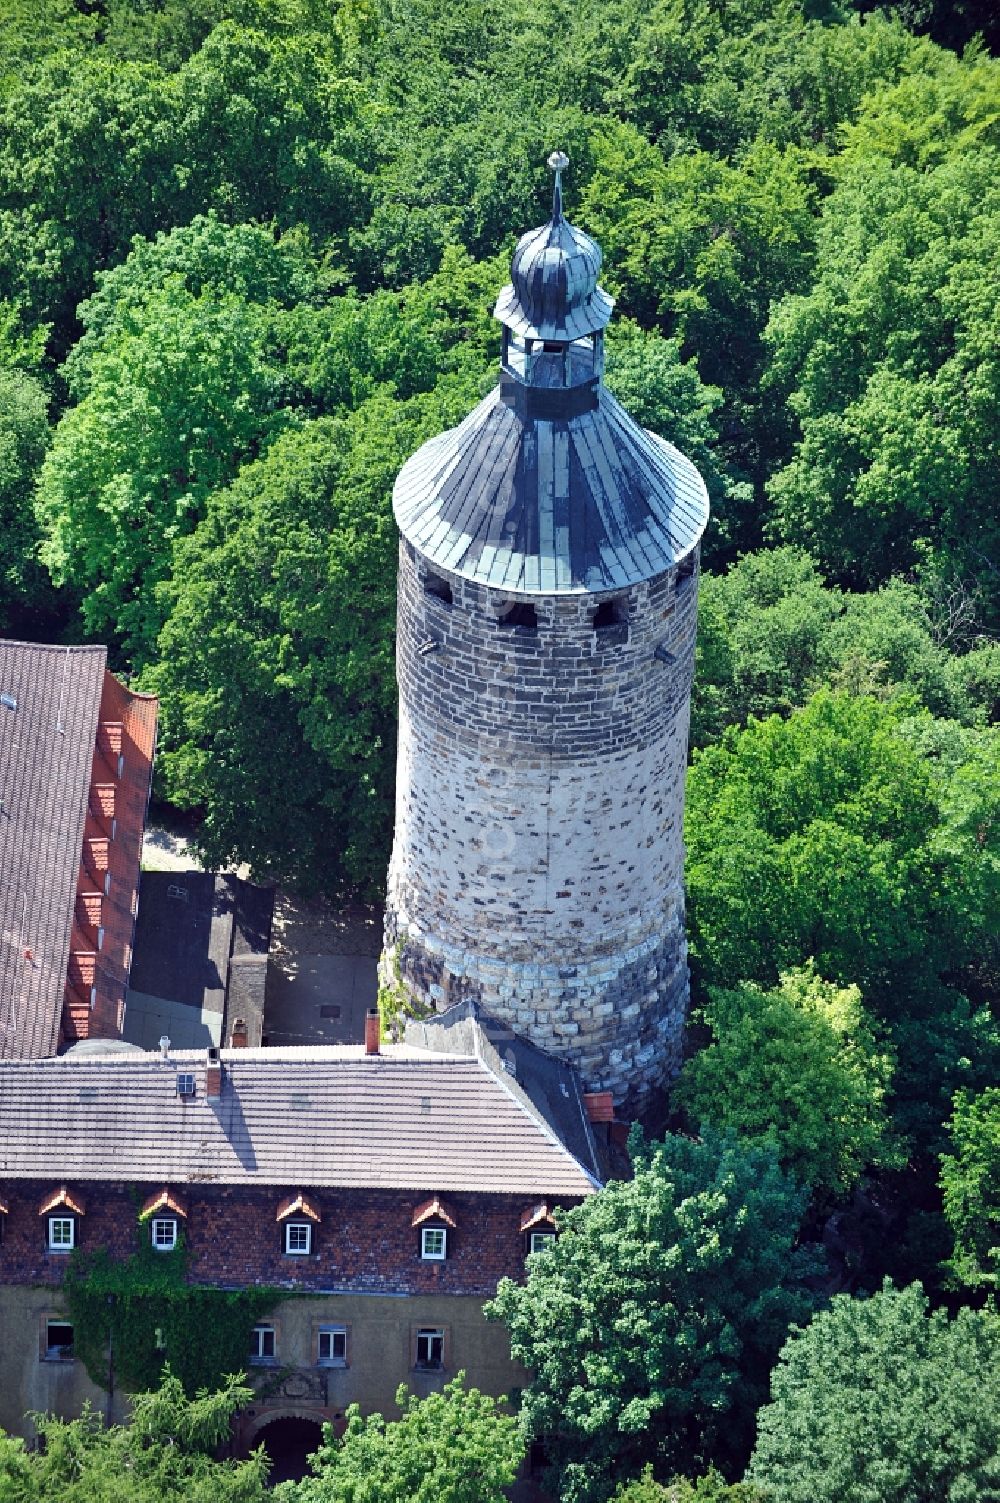 Tonndorf from above - Castle Tonndorf in the town of Tonndorf in Thuringia